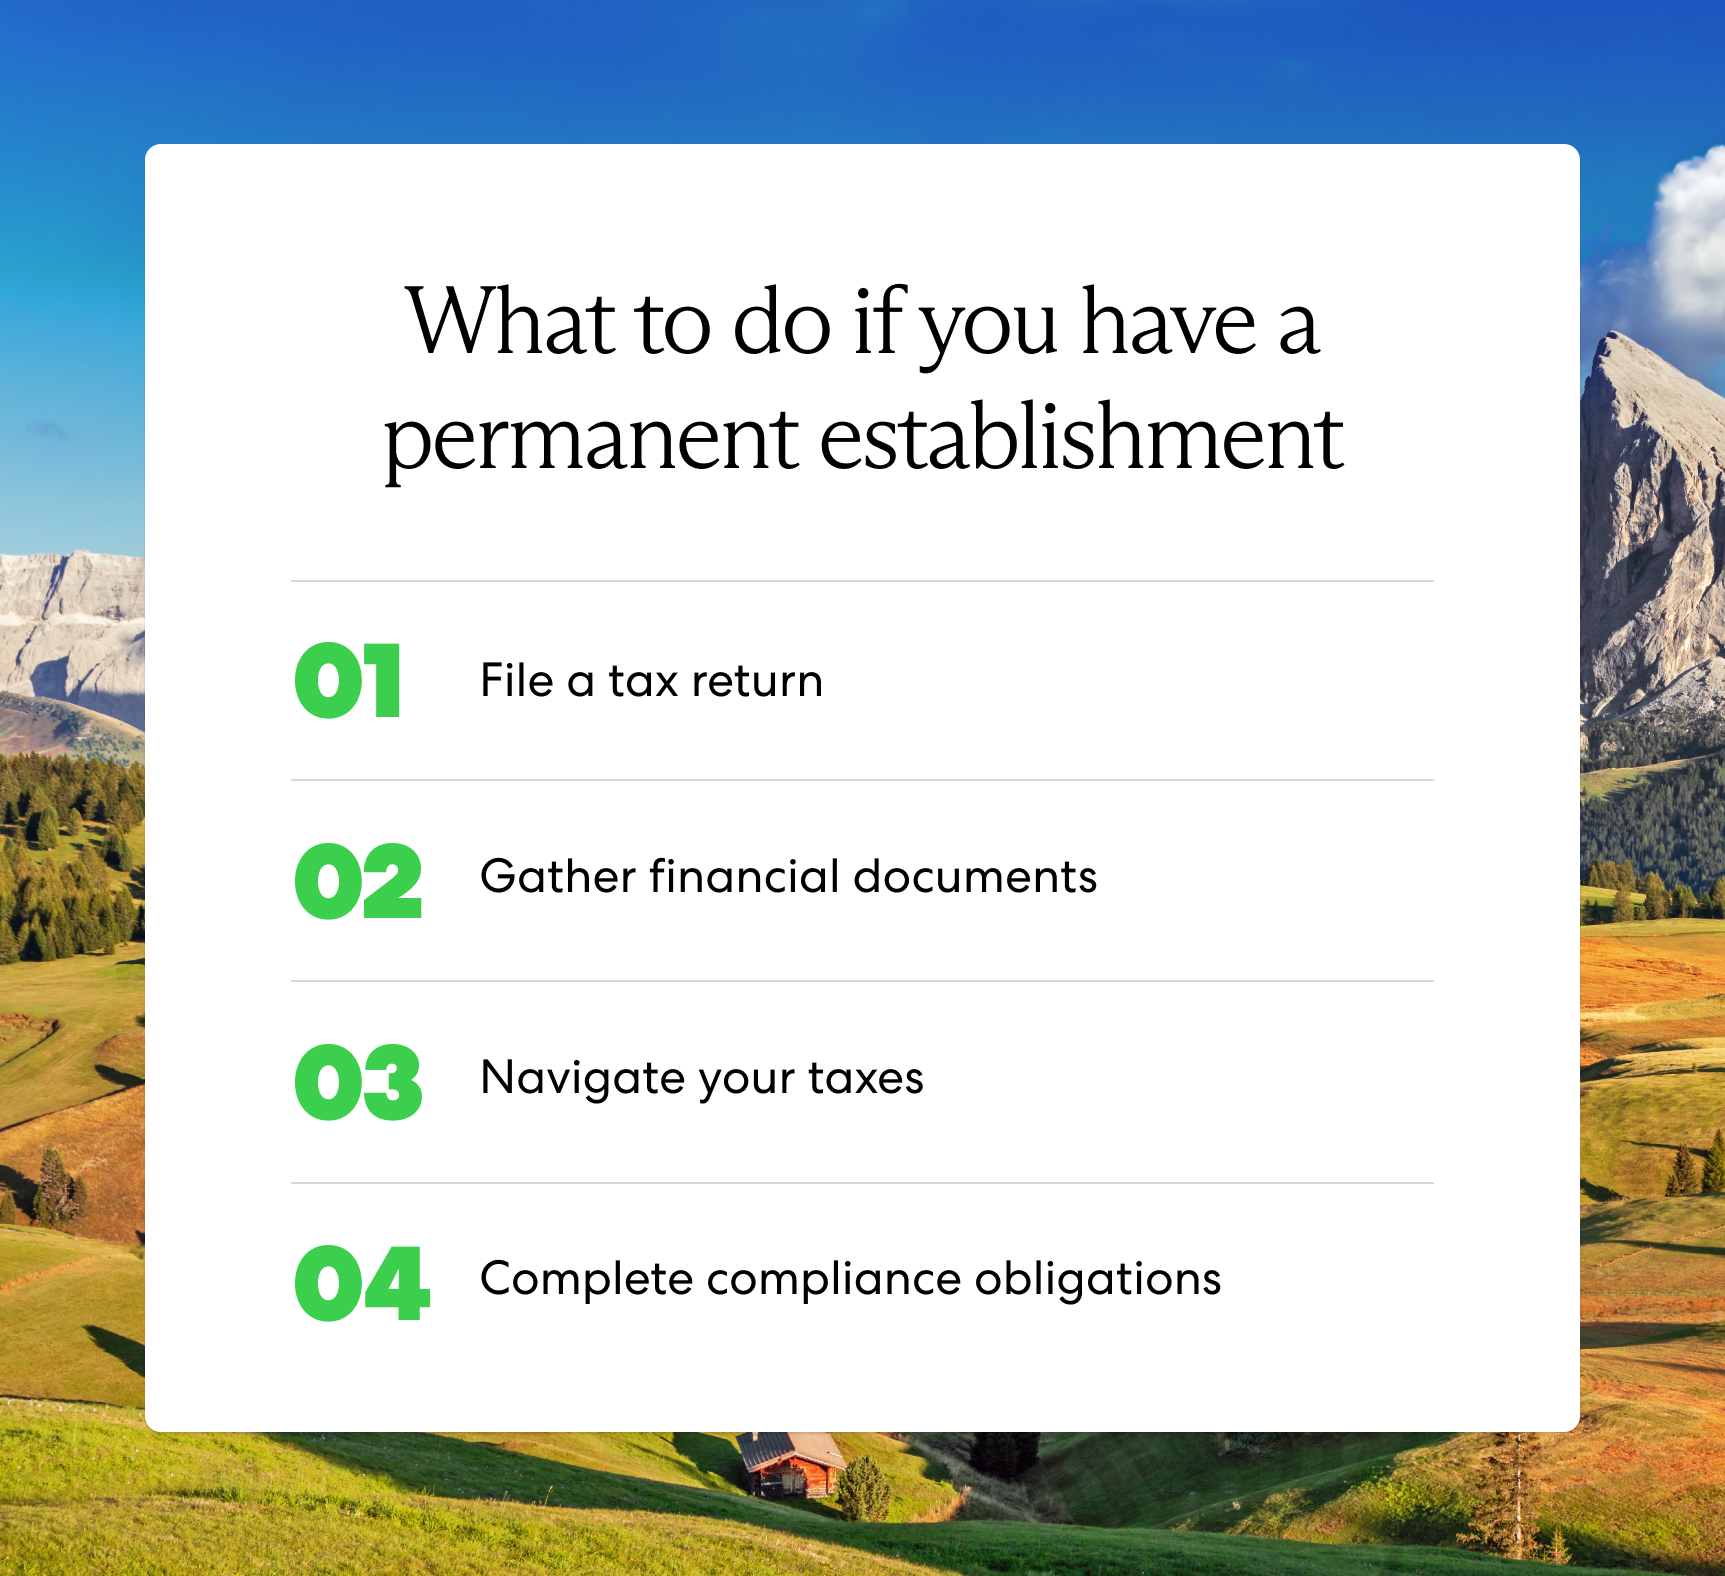 Graphic illustrating steps do if you have a permanent establishment. Steps include: File a tax return, gather financial documents, navigate your taxes and complete compliance obligations. 